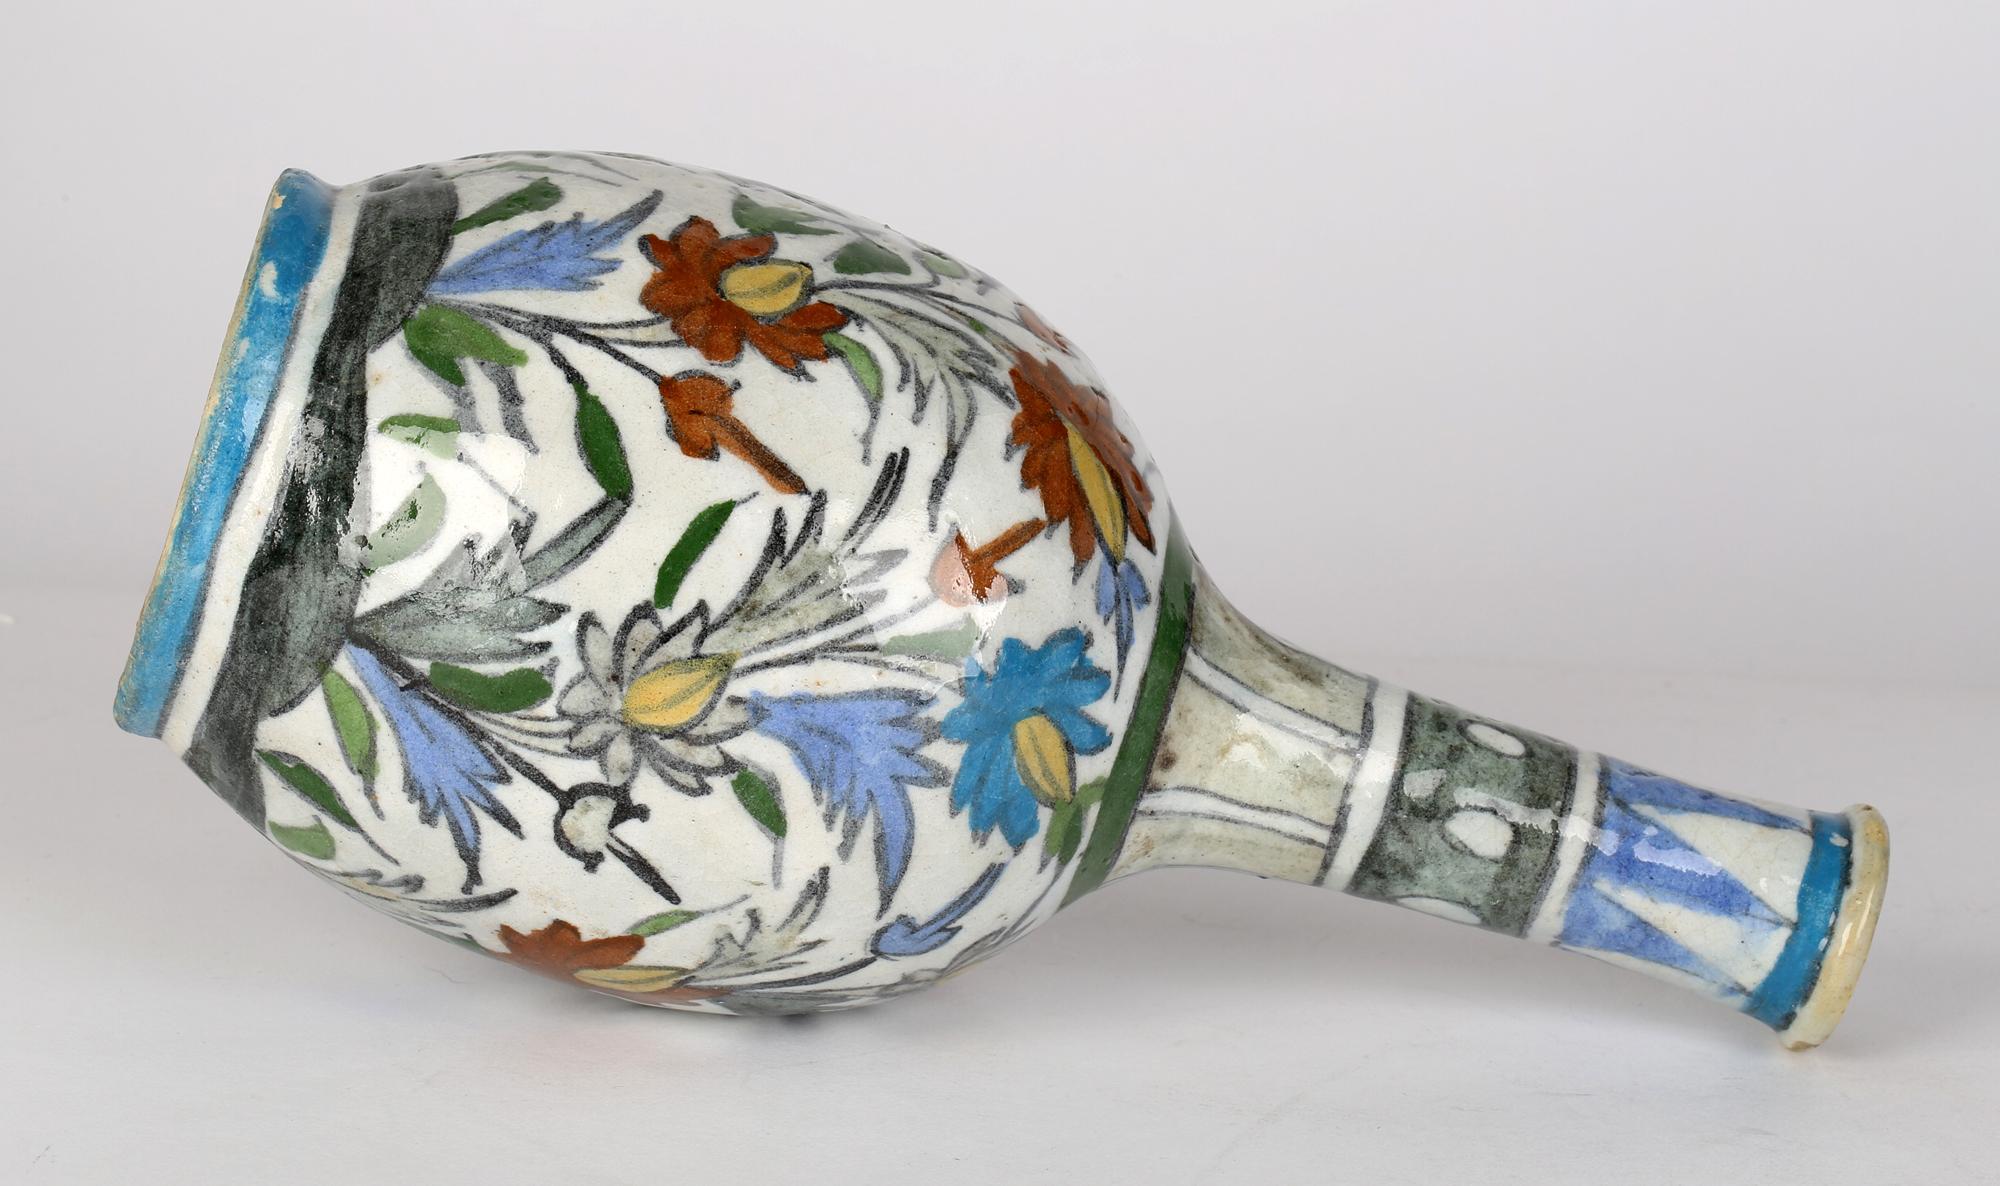 19th Century Persian Art Pottery Bottle Shape Vase Hand-Painted with Floral Designs